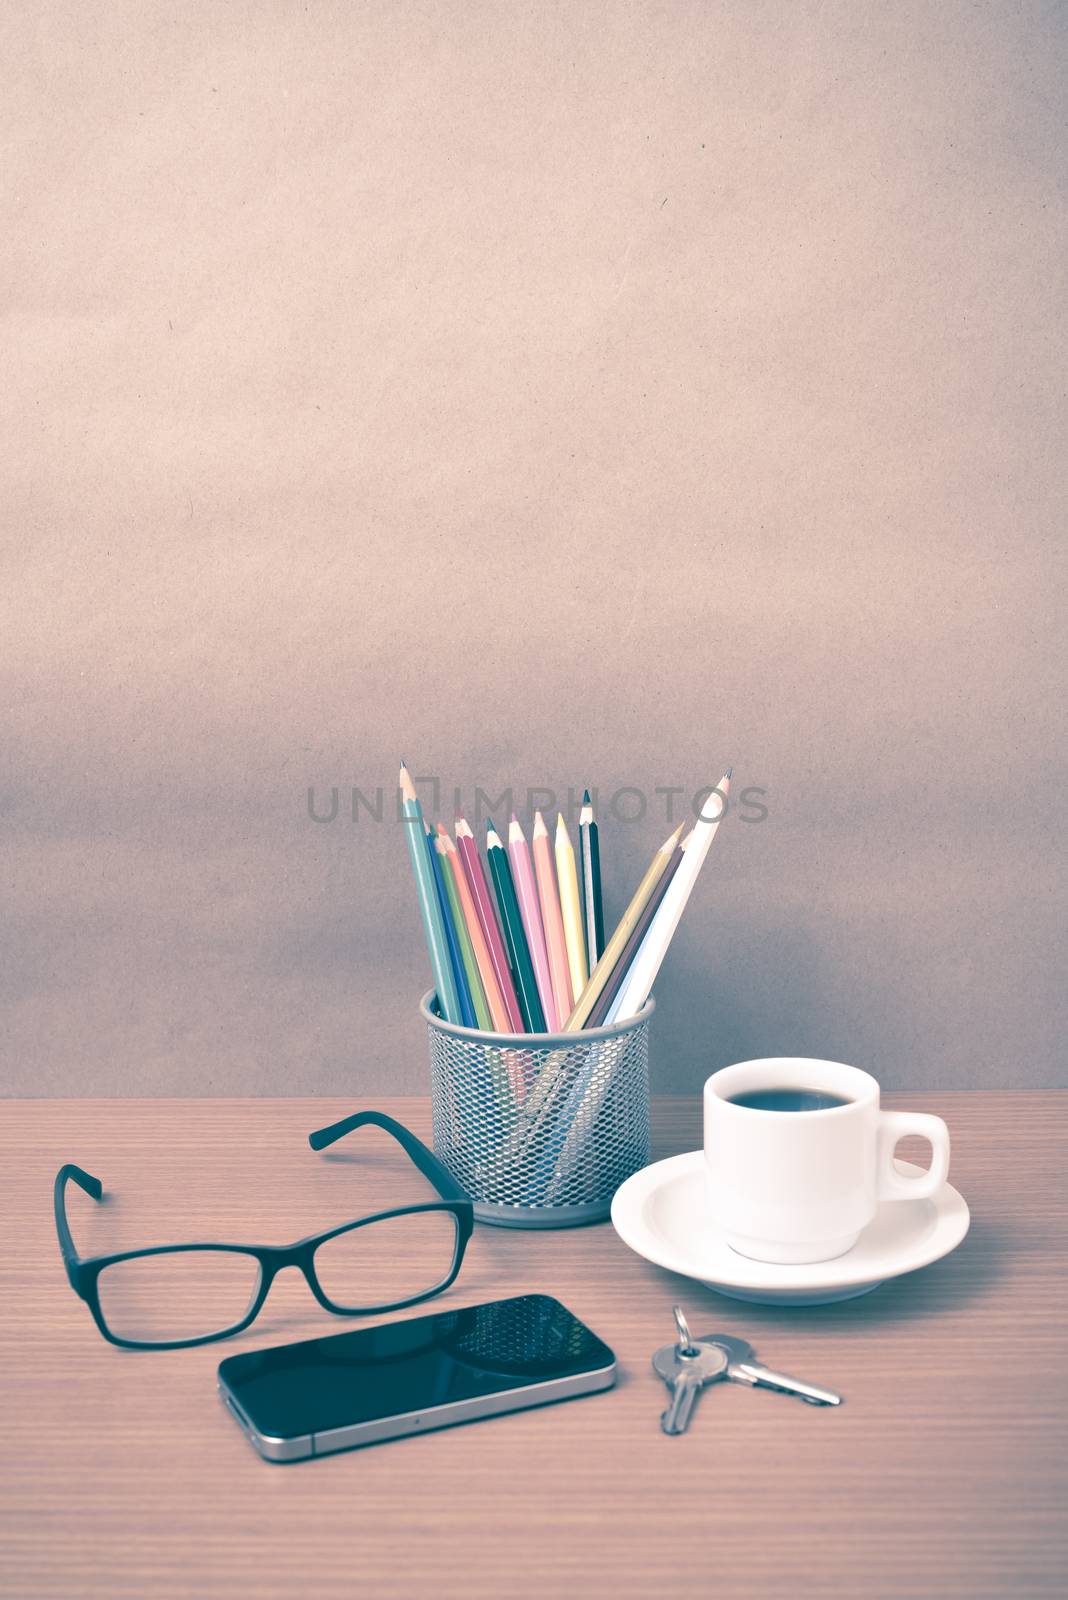 coffee,phone,eyeglasses,color pencil and key by ammza12